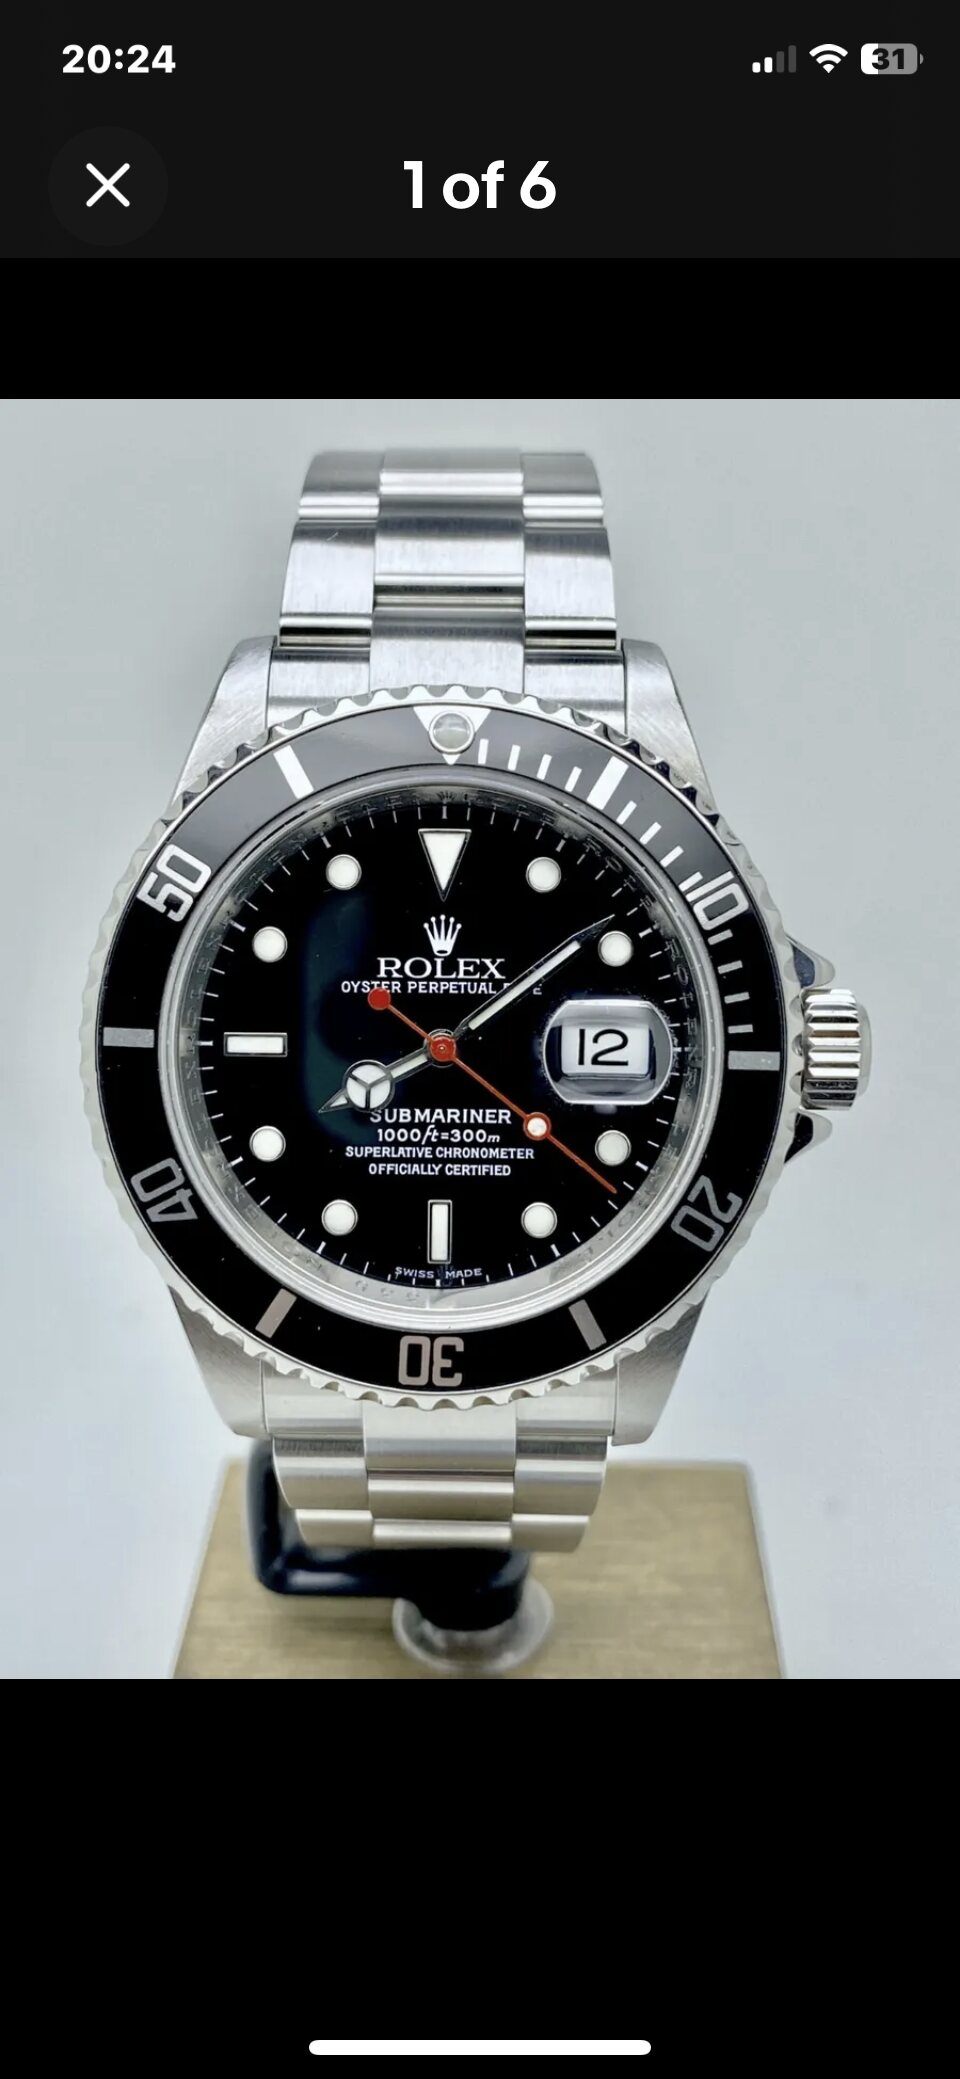 Pistonheads - The image showcases a close-up view of a Rolex watch. The watch features a silver band and is adorned with the iconic Rolex logo on the face, along with other distinguishing elements typical of Rolex watches. The screen displays a picture of the watch, while the phone's camera is pointing directly at it, capturing its intricate details.